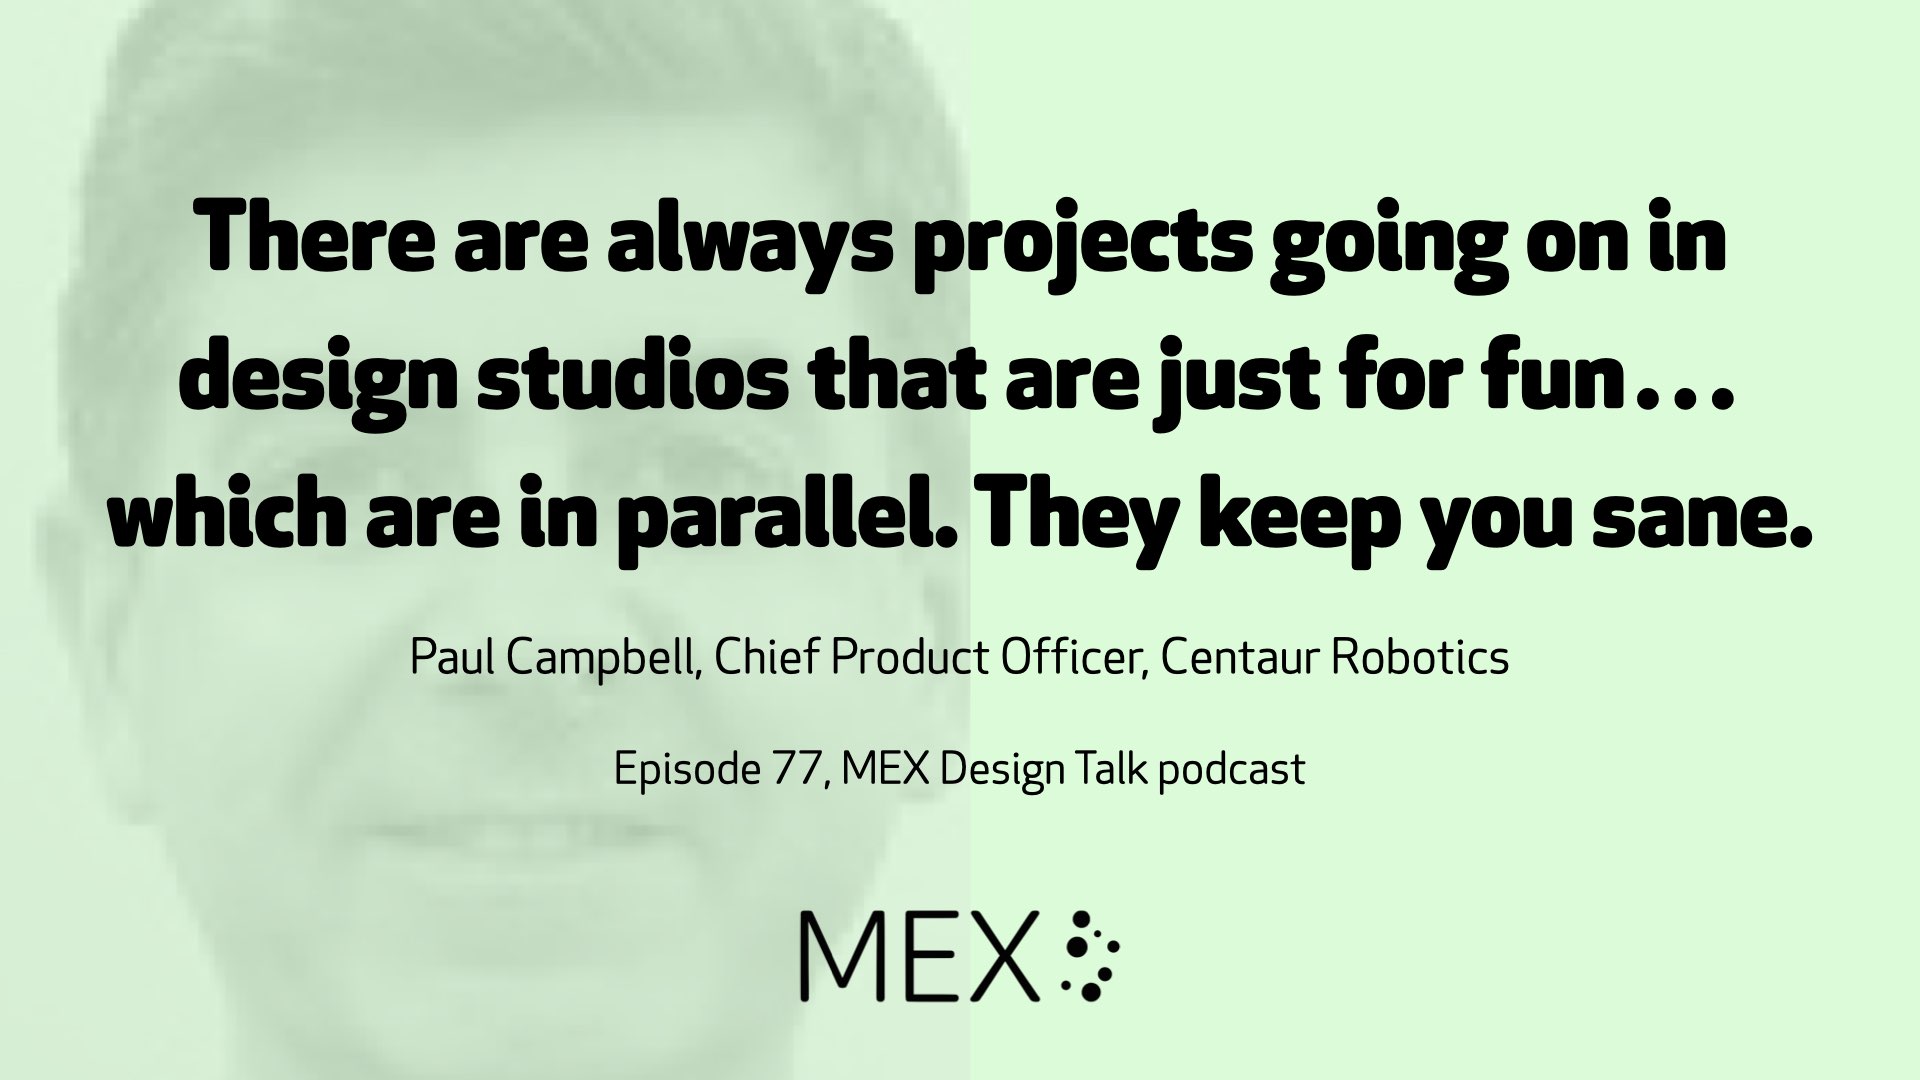 There are always projects going on in design studios that are just for fun…which are in parallel. They keep you sane.  Paul Campbell, Chief Product Officer, Centaur Robotics  Episode 77, MEX Design Talk podcast